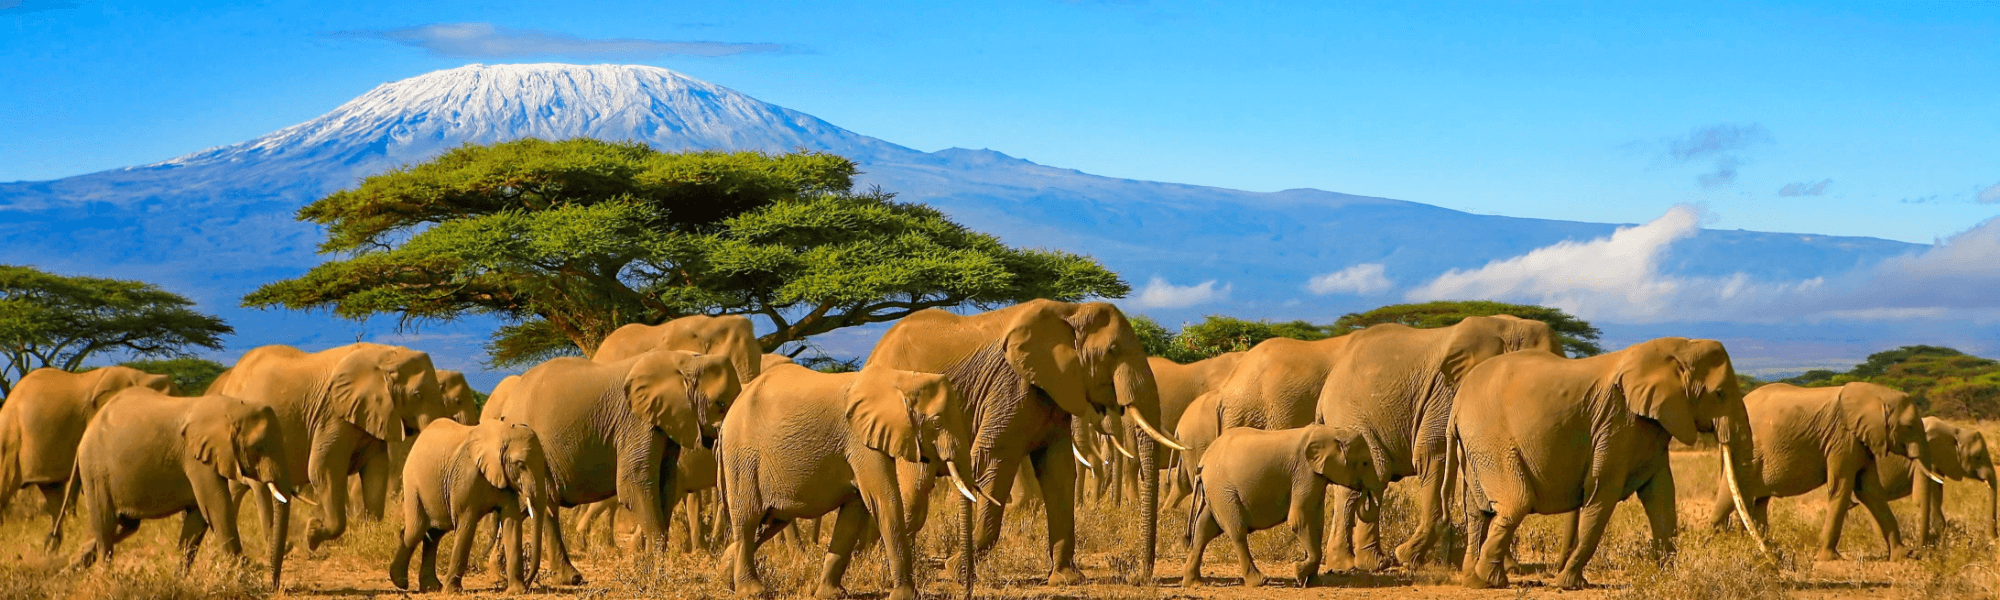 Heard of elephants walking in grass with trees and a mountain in the backdrop